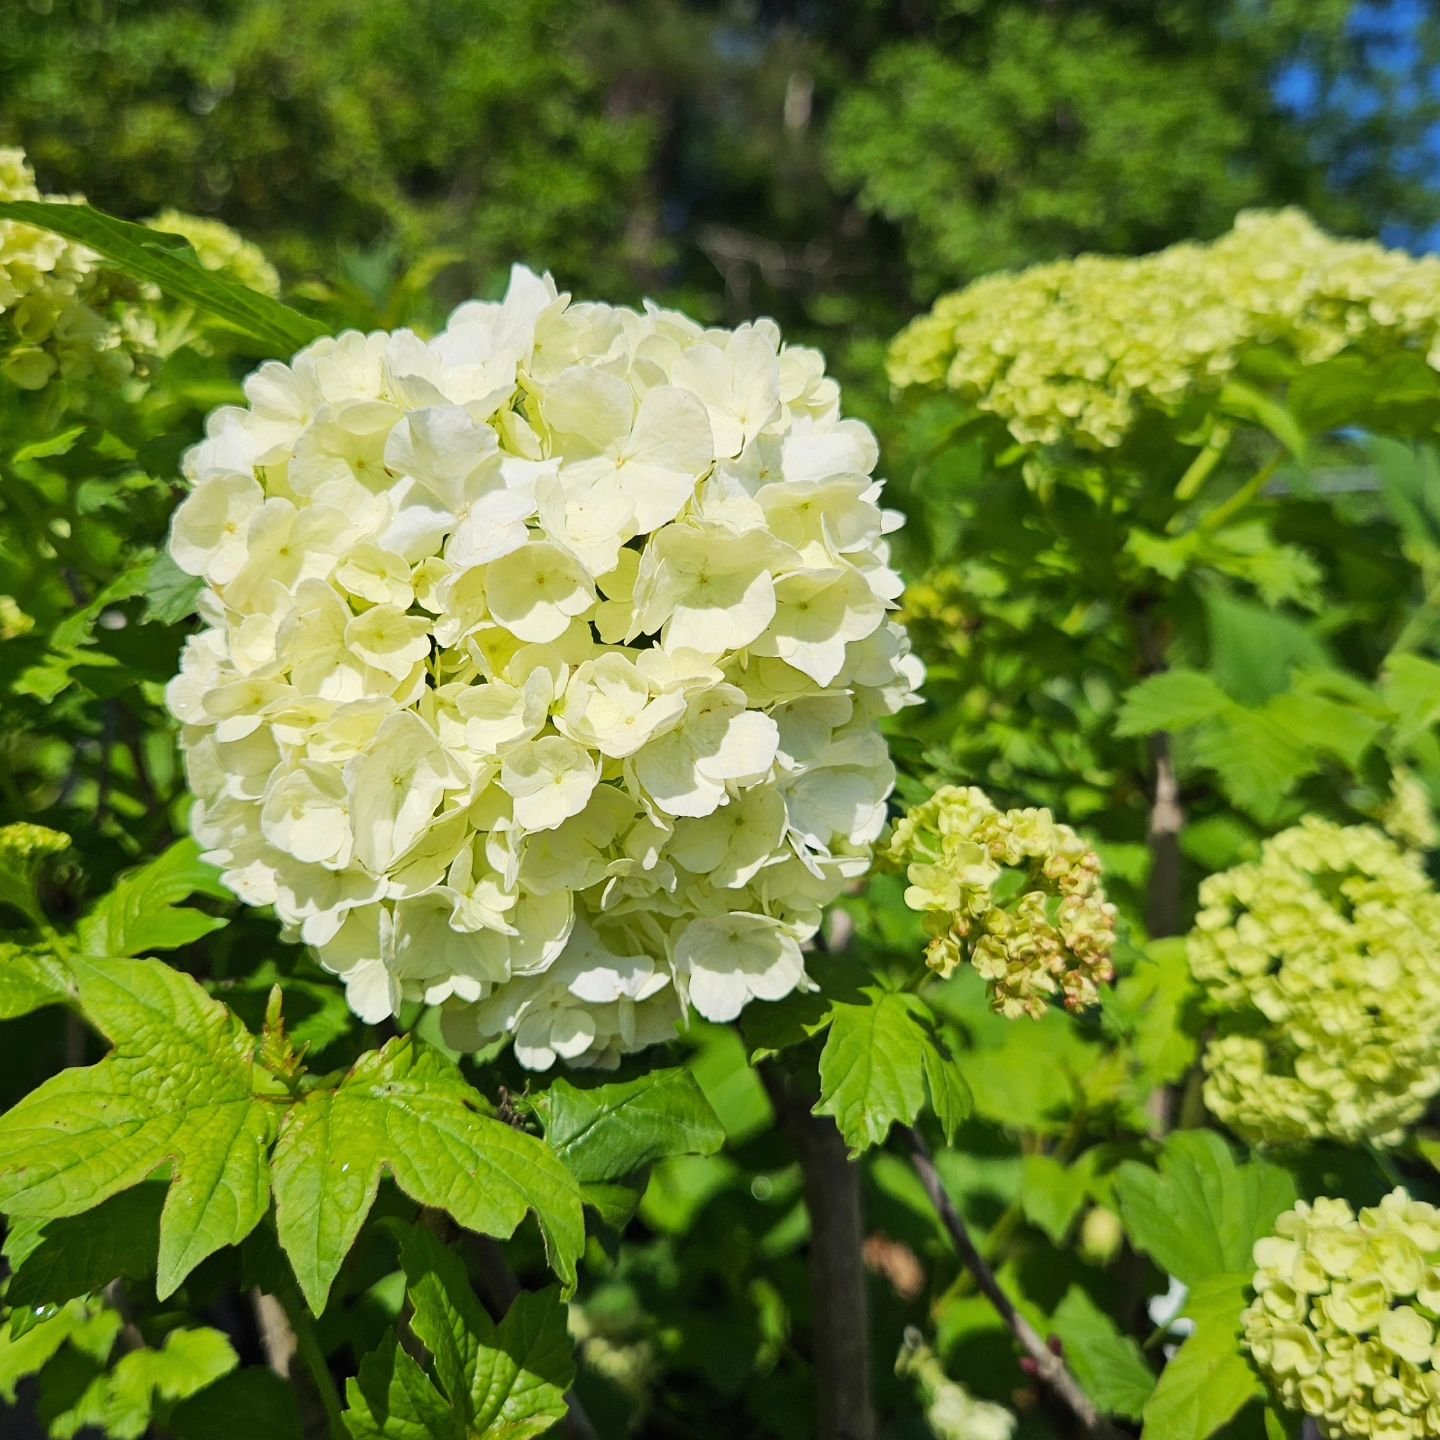 Add a touch of springtime magic to your landscape with the Common Snowball Viburnum! This easy-care shrub explodes with massive, snowball-like white flowers in late spring, creating a stunning focal point in any garden.
 * Showy white snowball flower